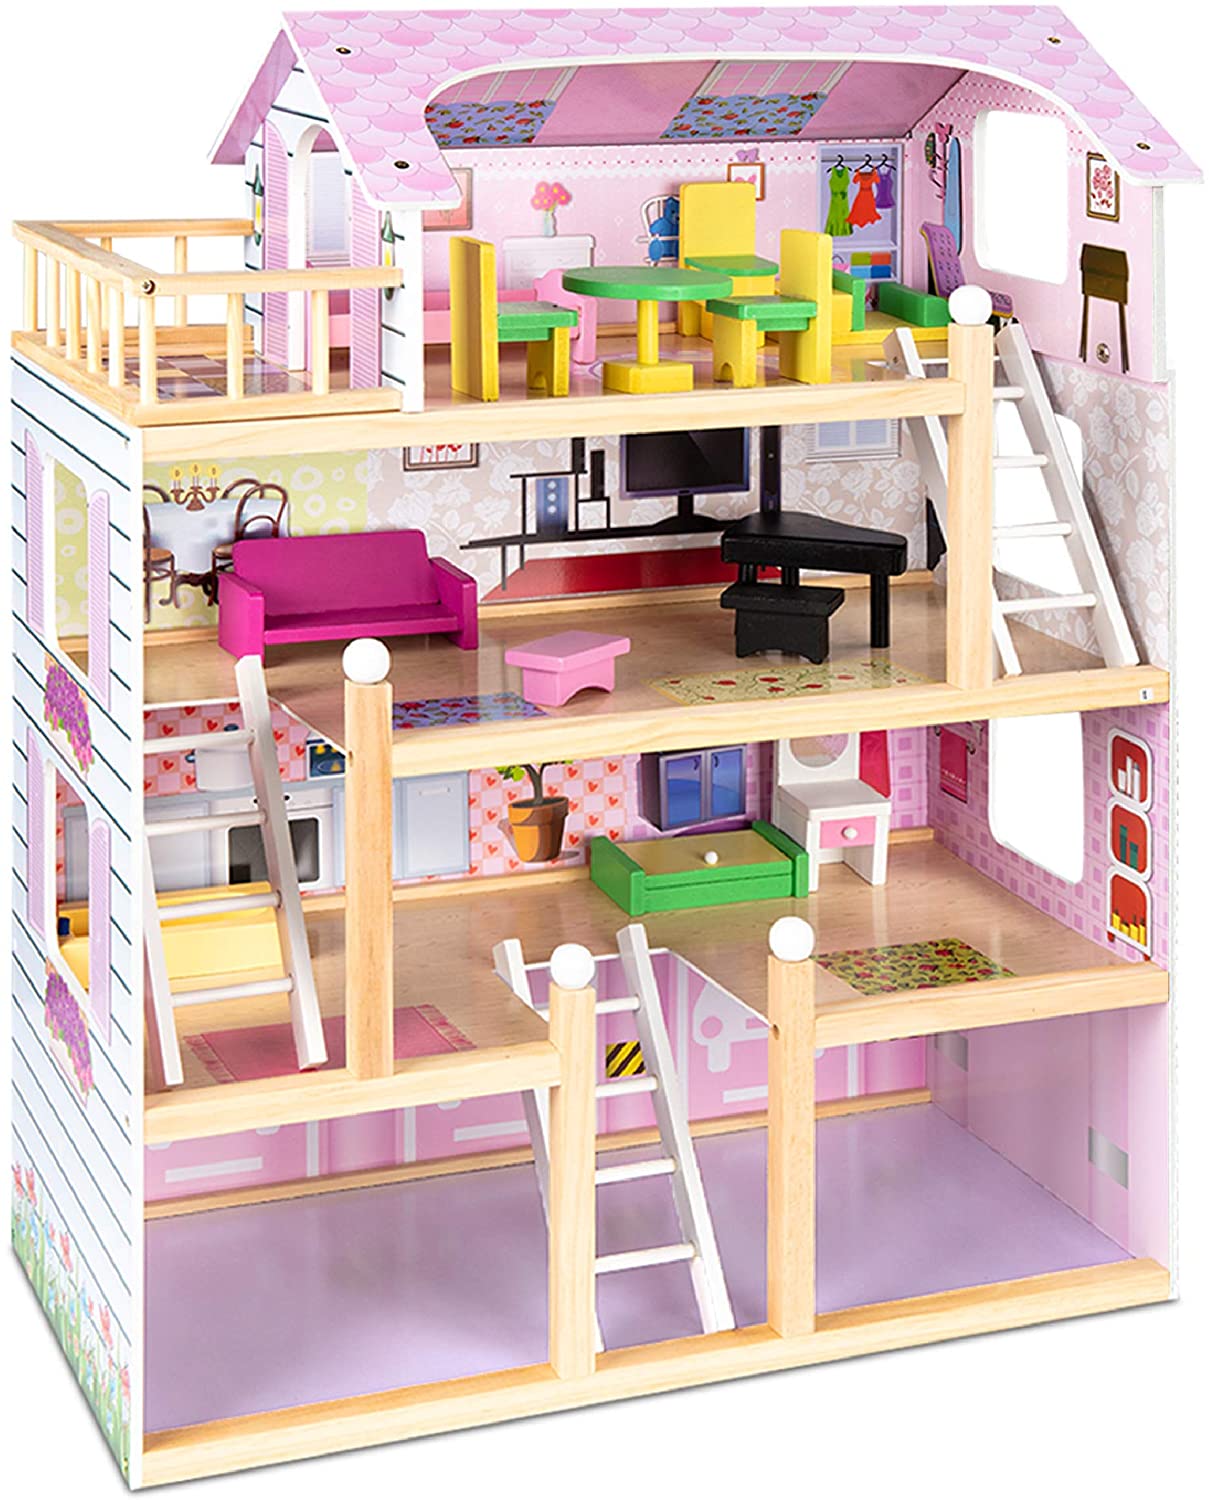 Wooden Kids Doll House With 17PCS Furnitures 3 storey Barbie Dollhouse Cottage 